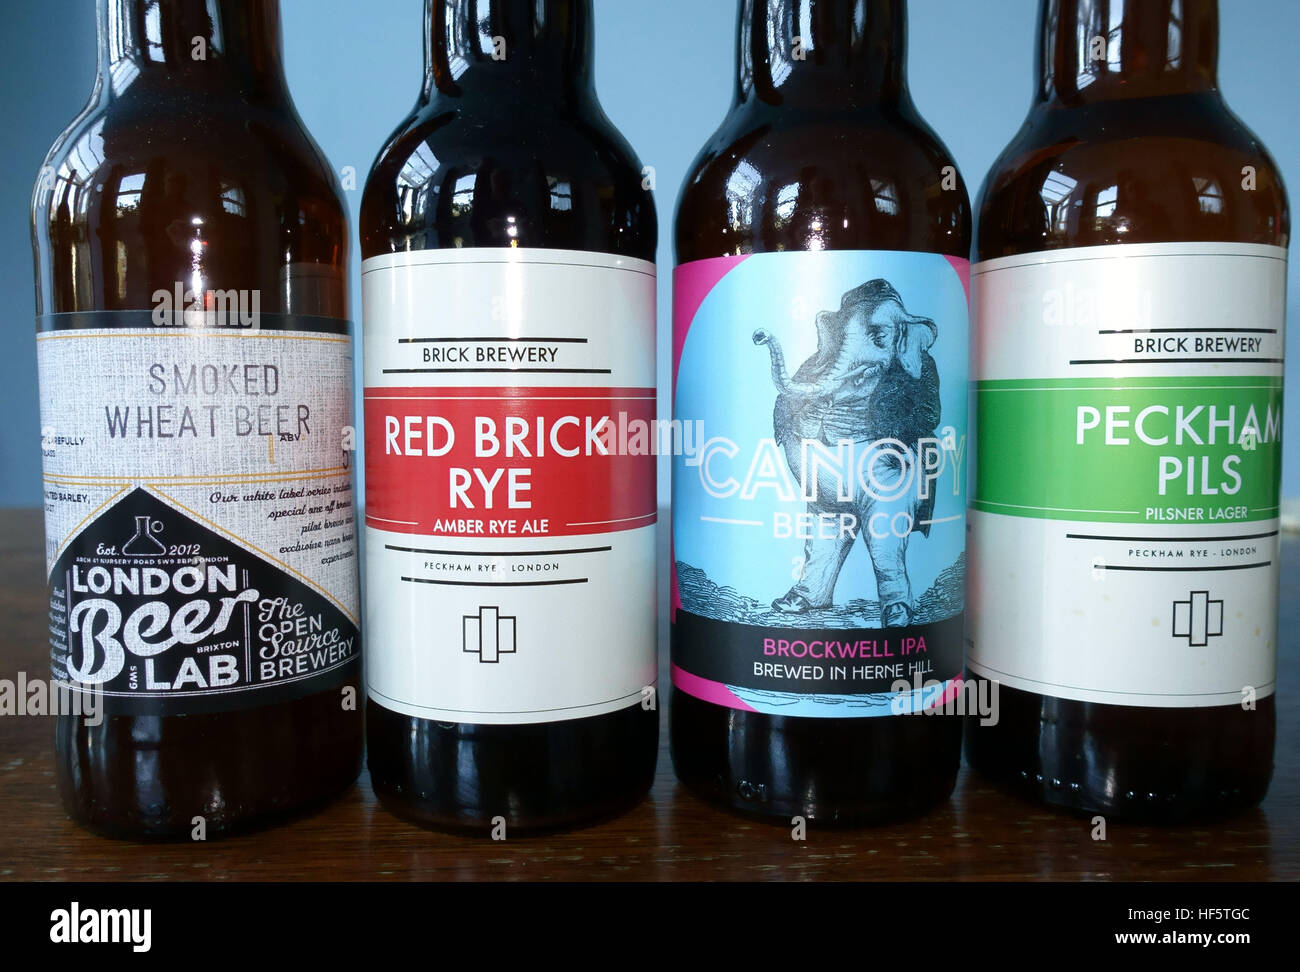 Bottles of various craft beers from several London breweries, London Stock Photo